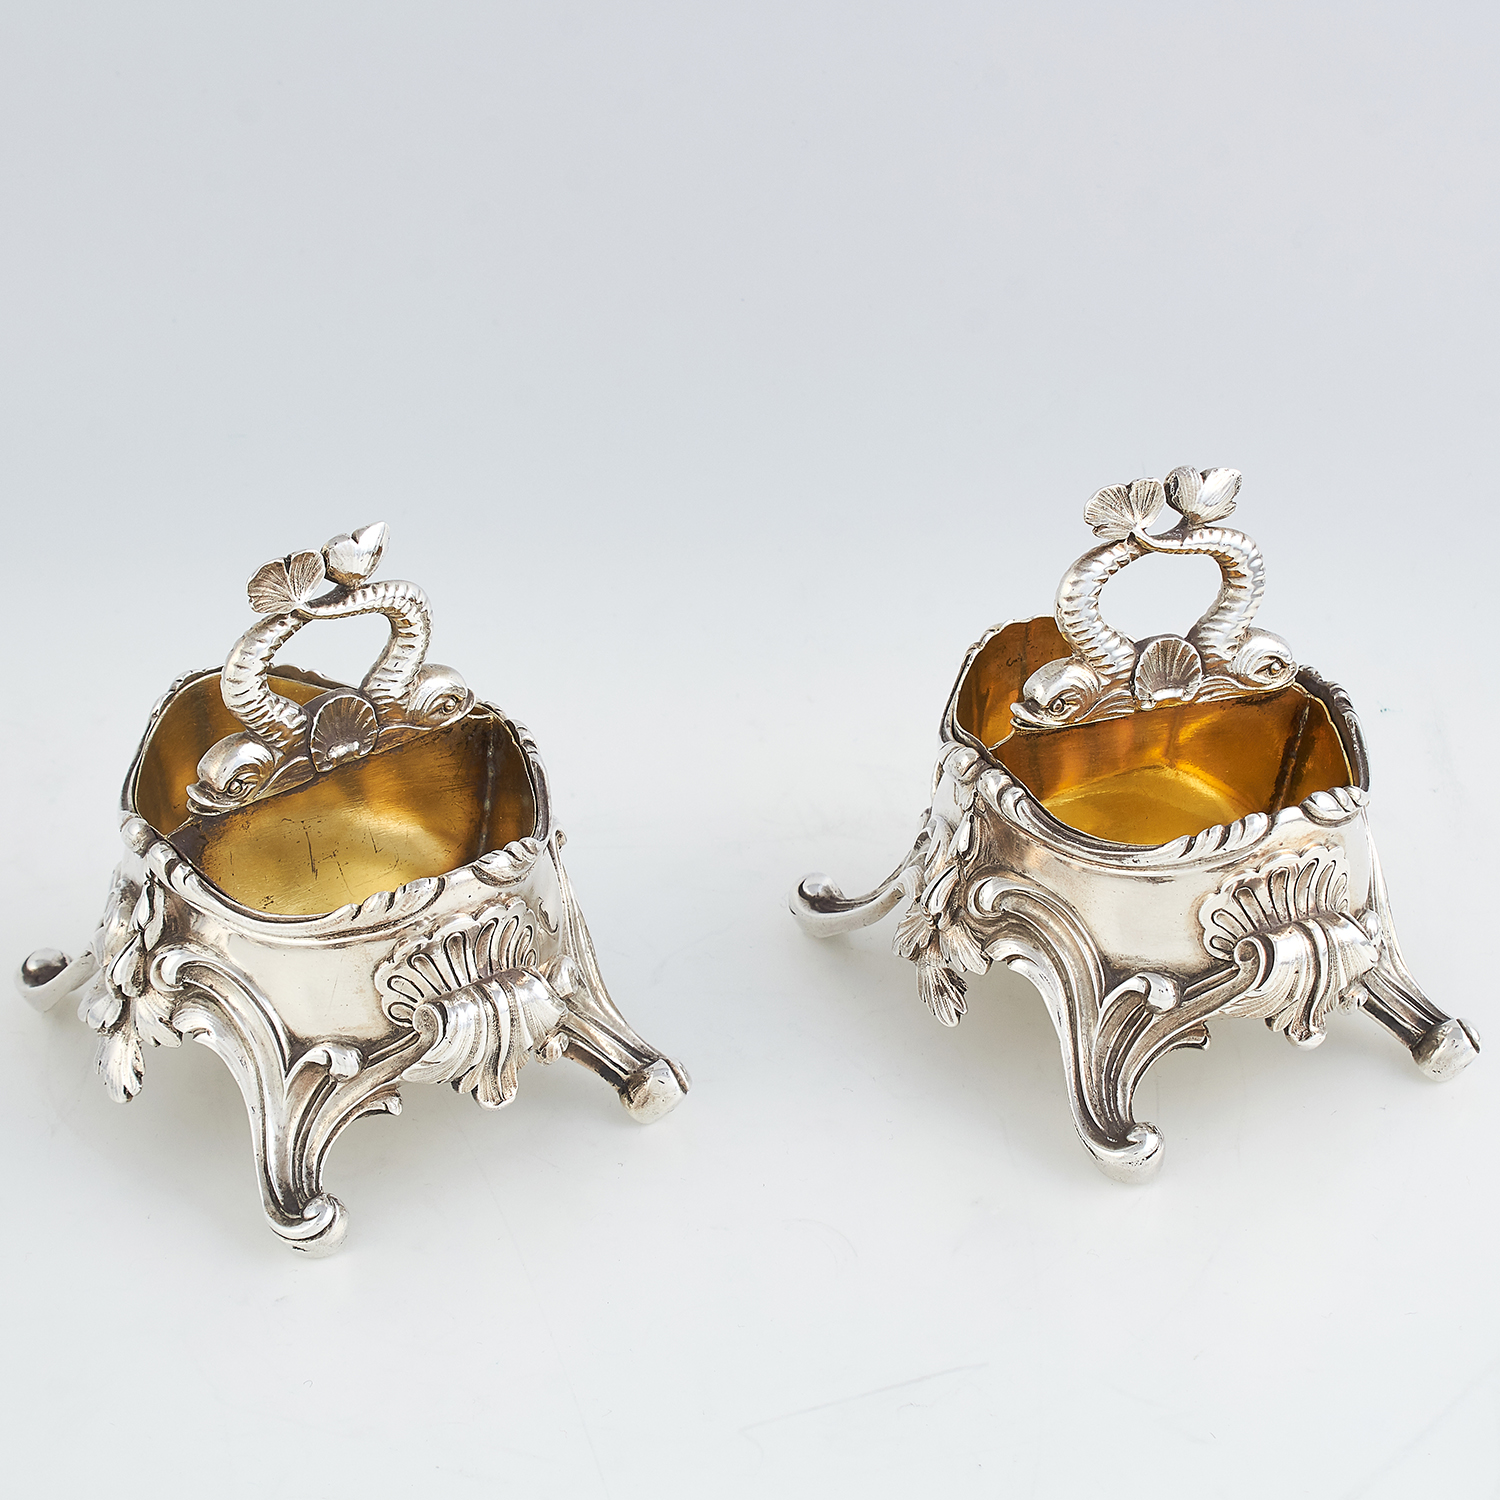 PAIR OF ANTIQUE FRENCH SILVER SALT CELLARS, F DUNARD CIRCA 1870 of oval form, each raised on four